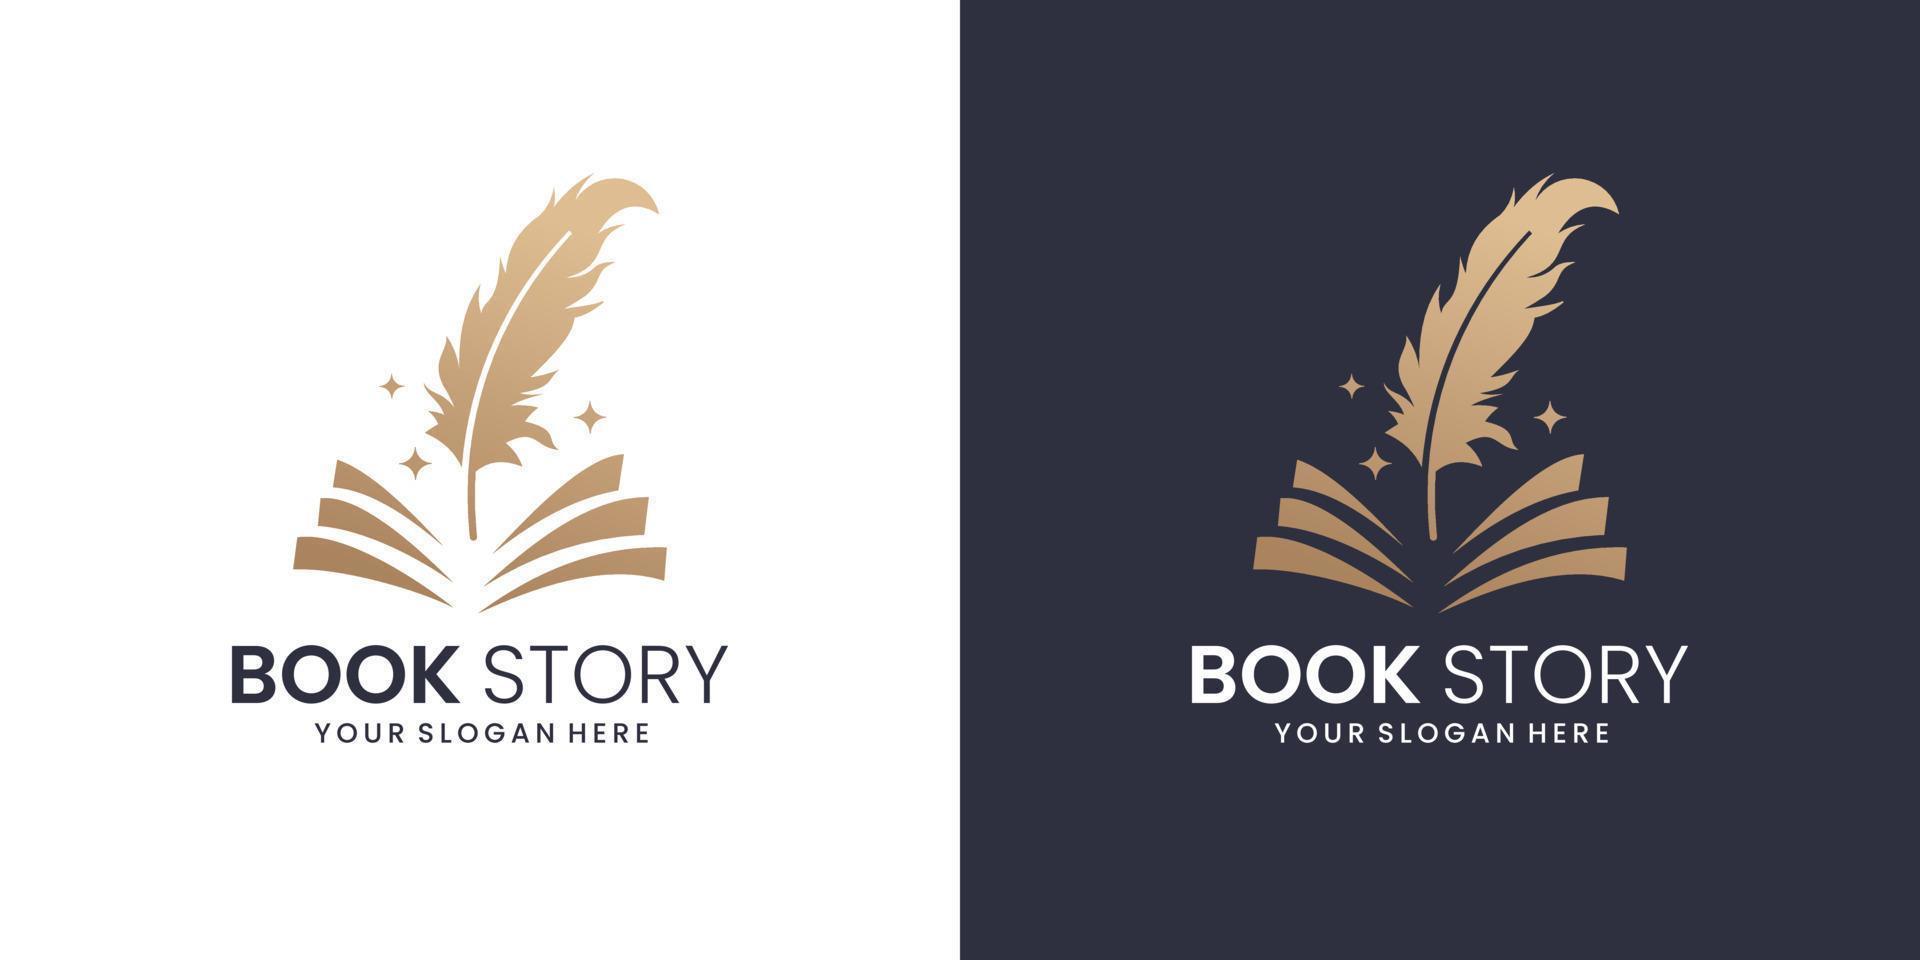 Story life book .store logo, book and feather, gradient logo template. Premium Vector